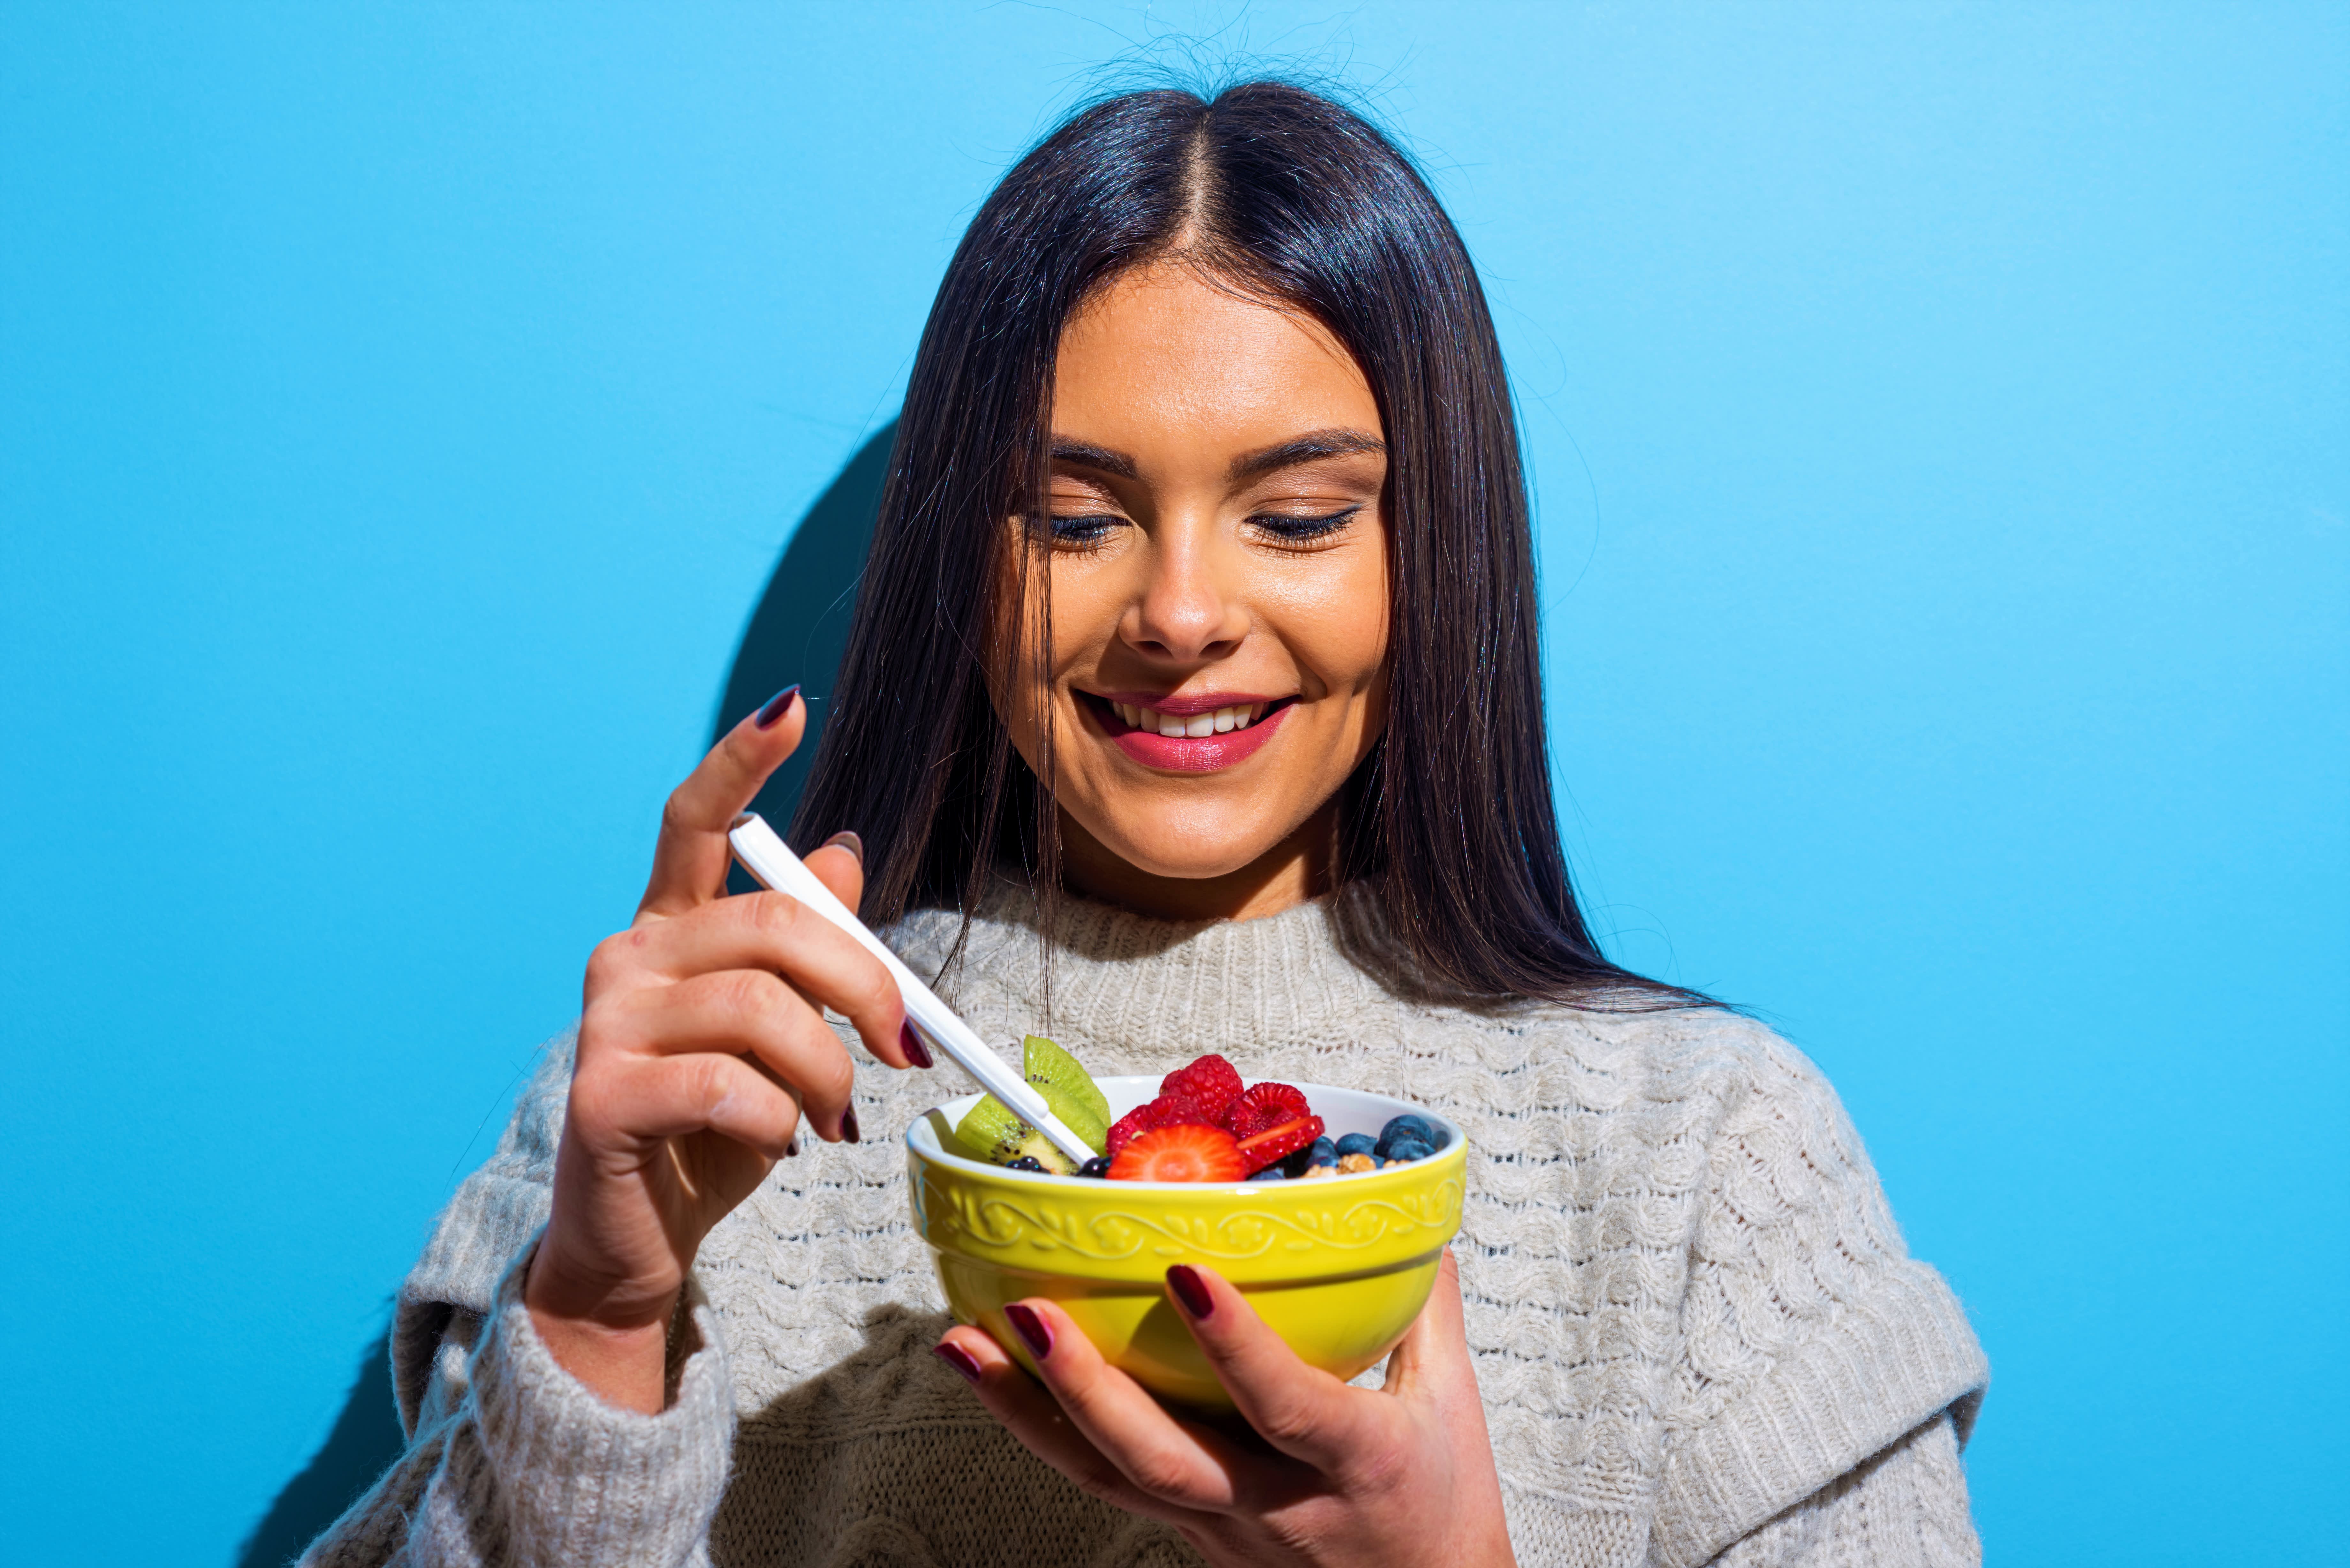 Eat these 5 foods to sharpen your brain health, memory and focus, says Harvard nutritionist.